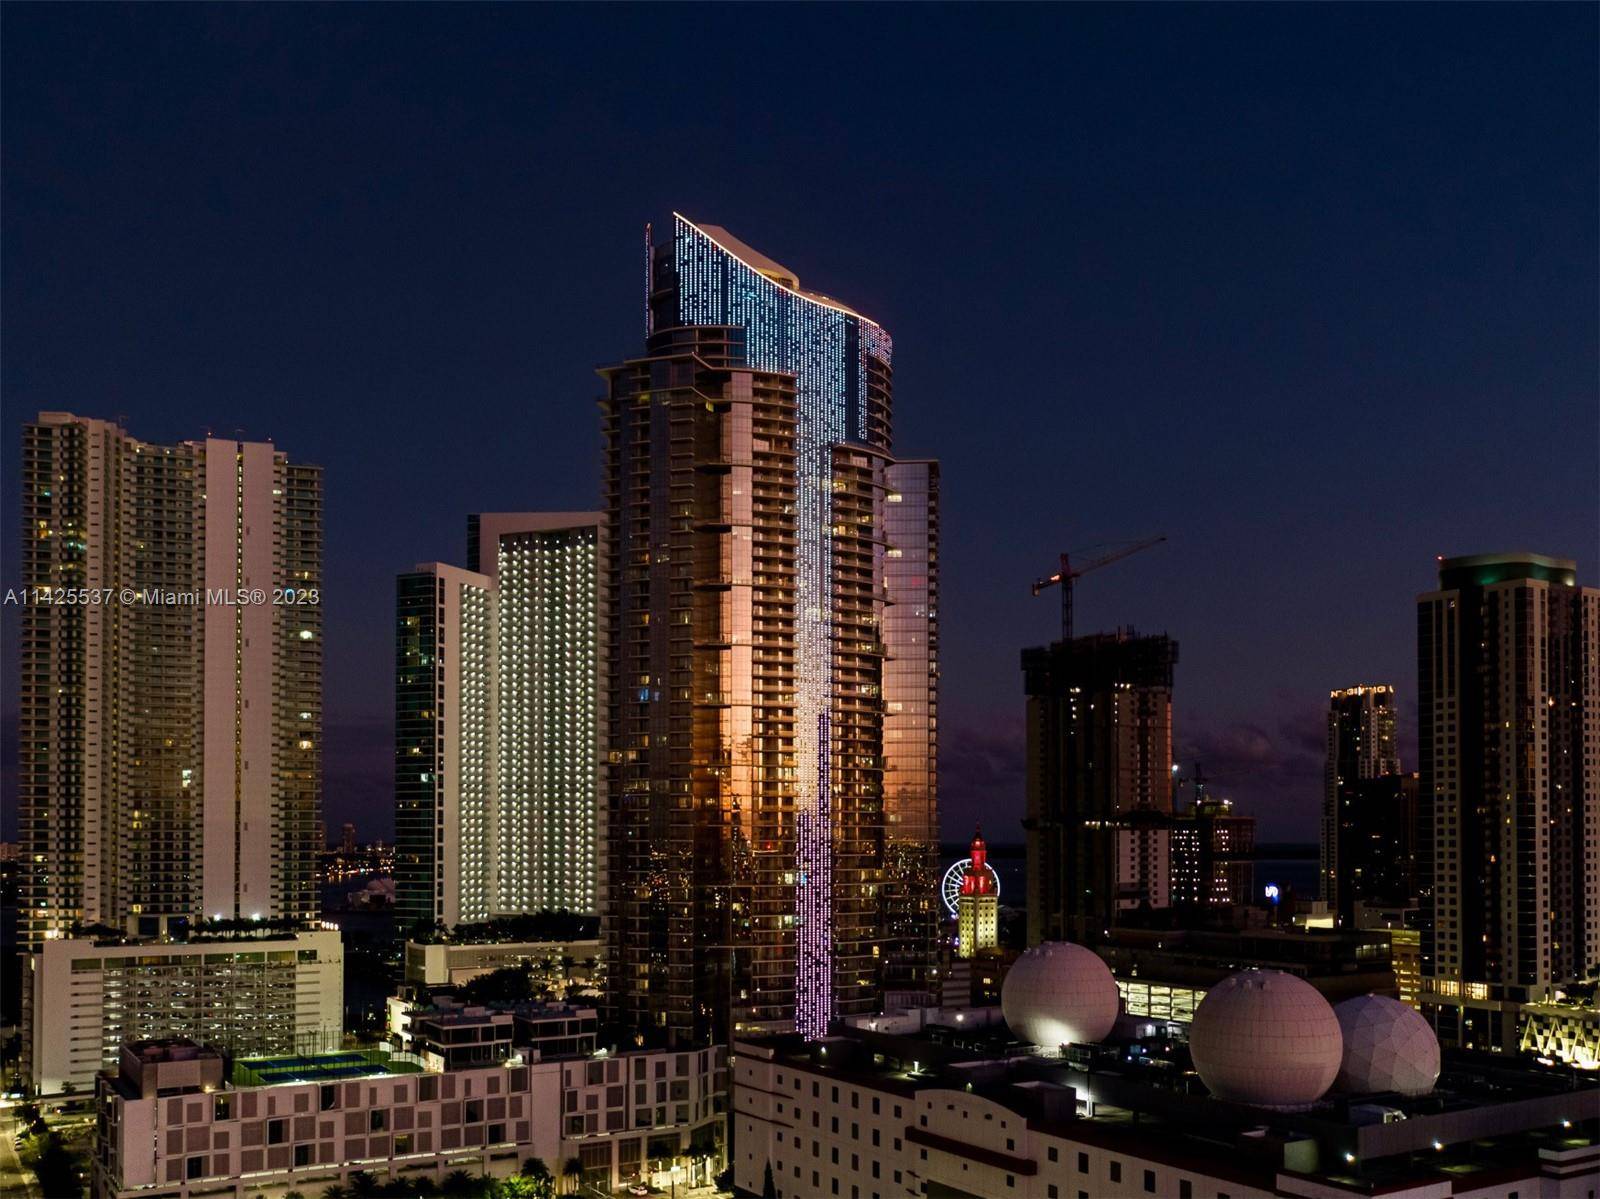 Located within Miami Worldcenter, the second largest master planned community in the U.